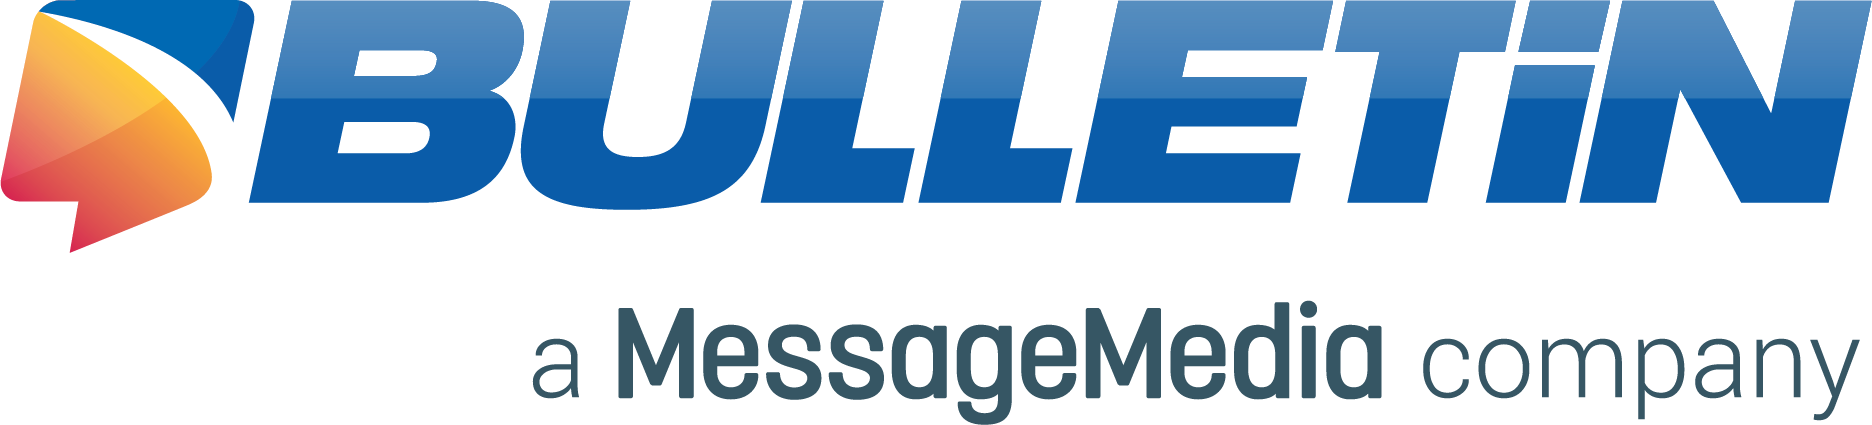 Bulletin - Part of the MessageMedia Group